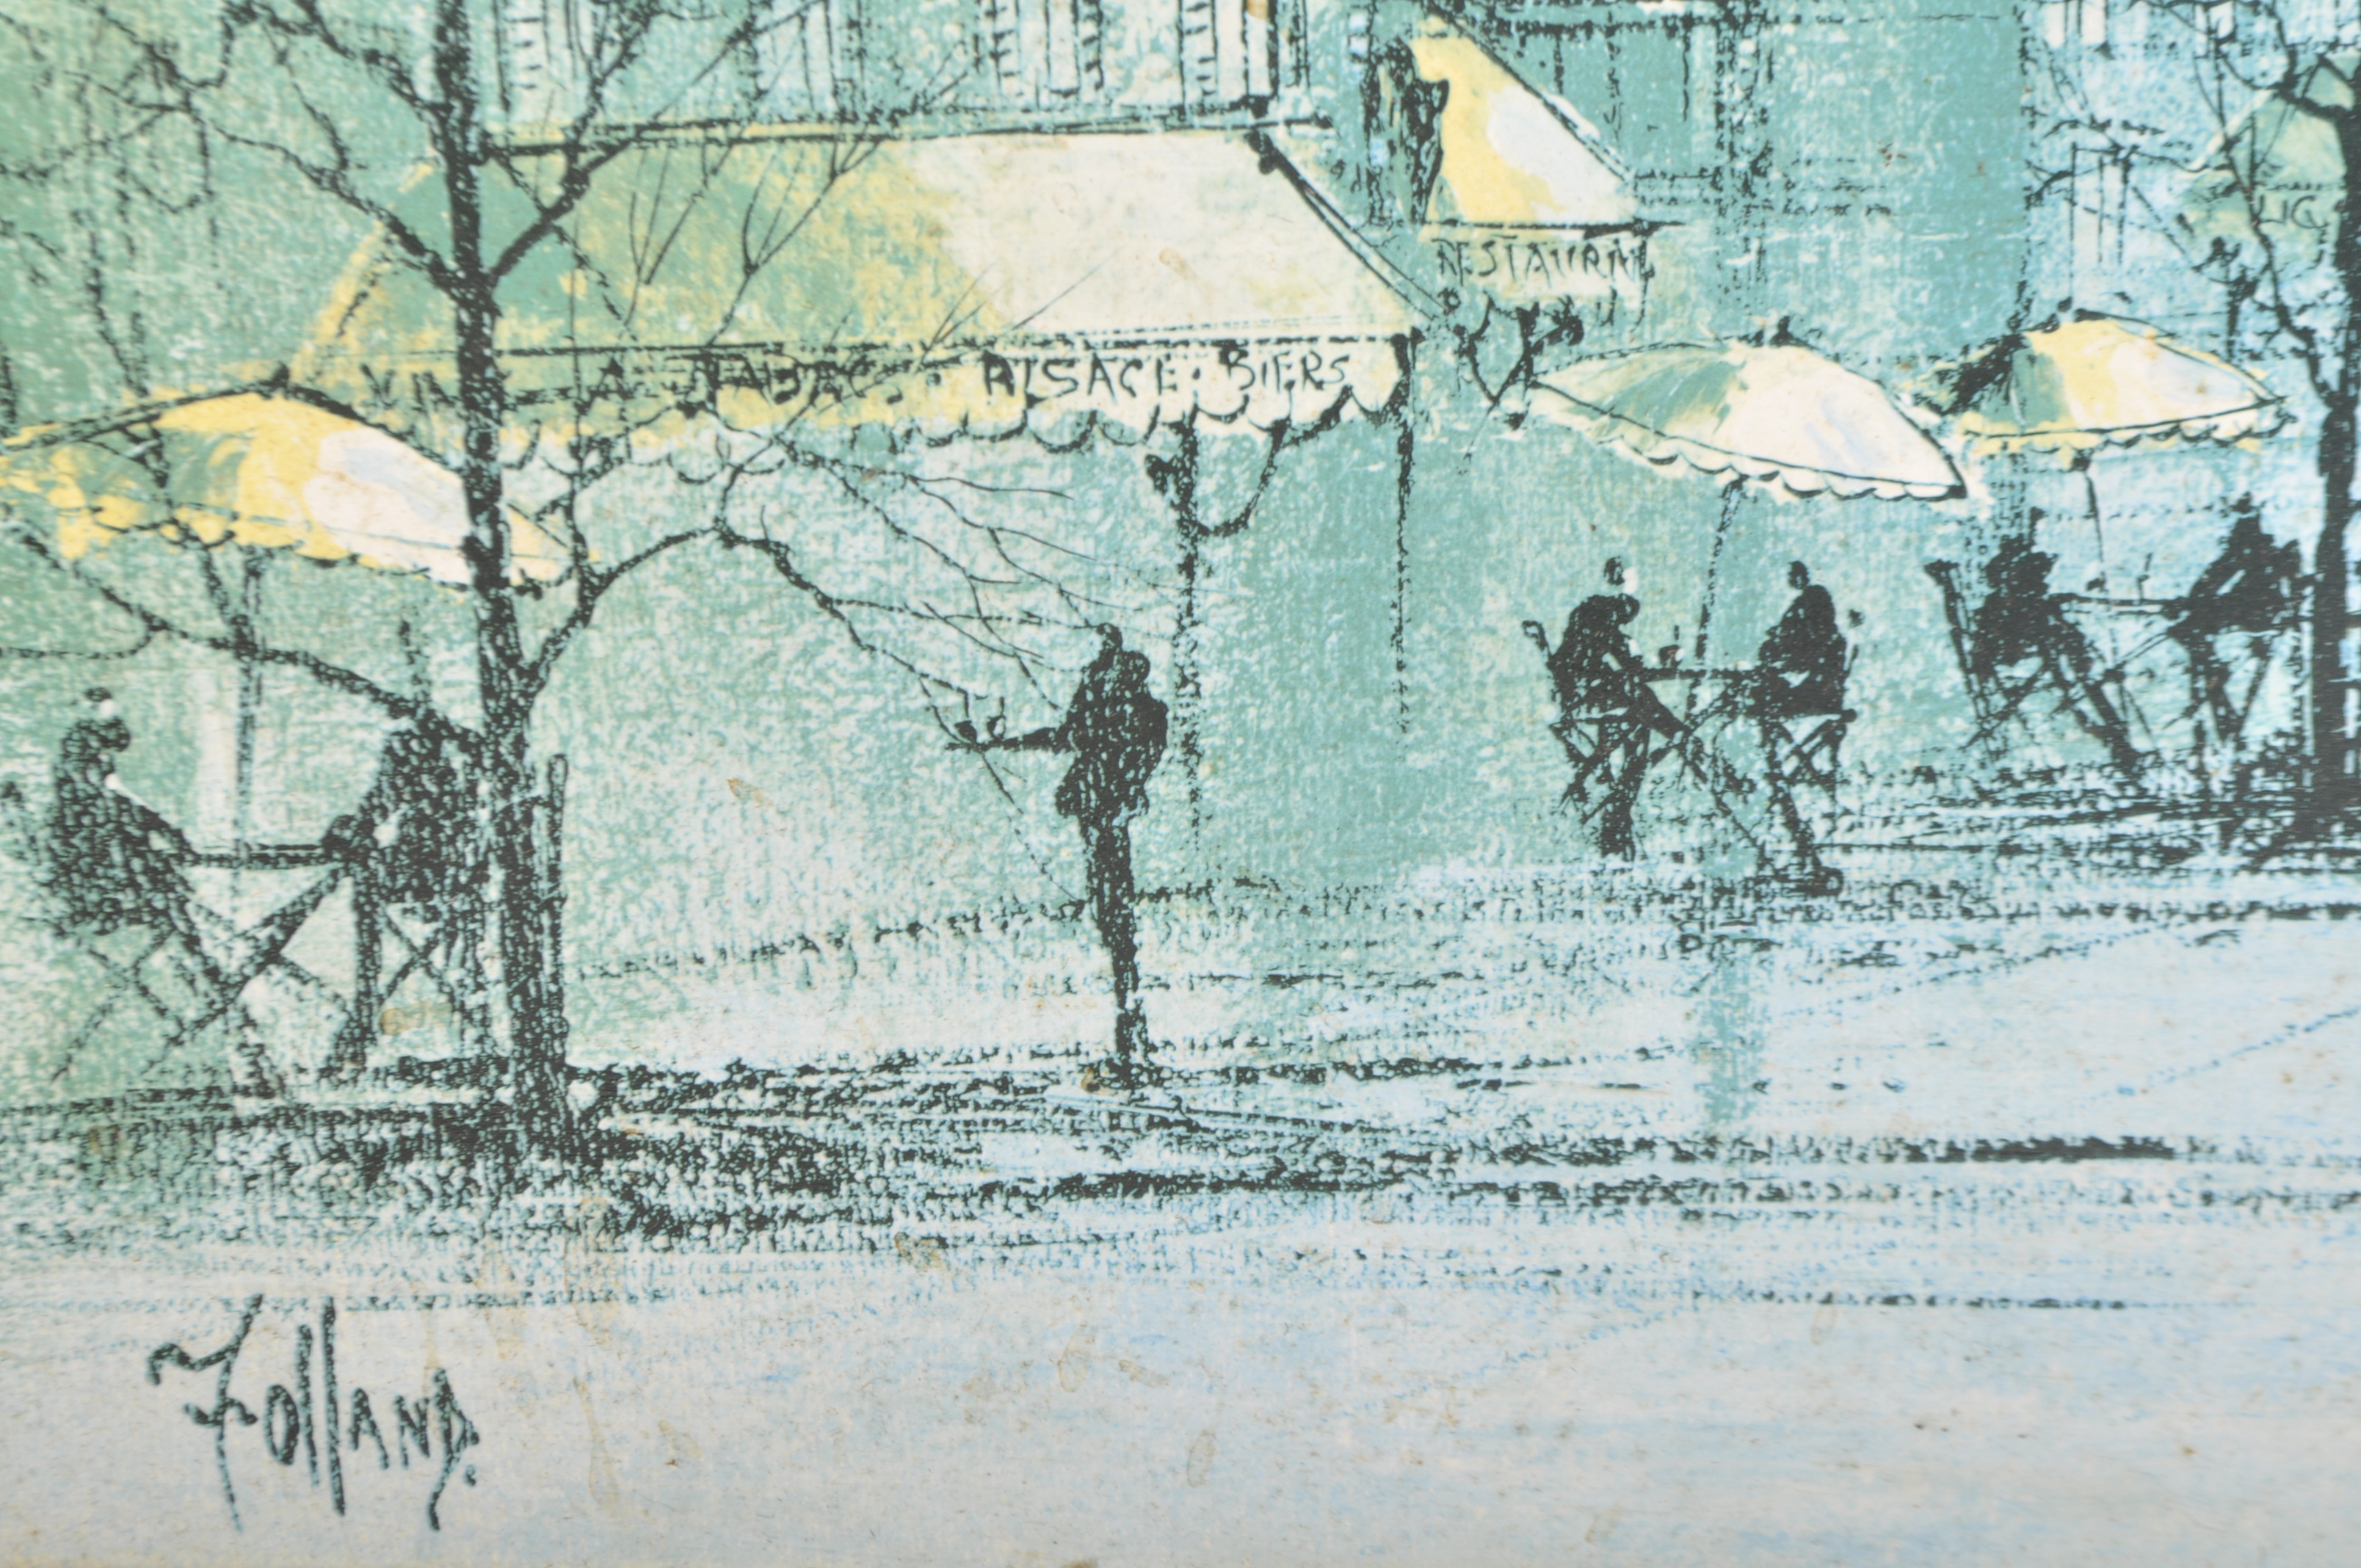 HOLLAND - MID CENTURY PRINT ON BOARD DEPICTING A CITY SCENE - Image 4 of 7